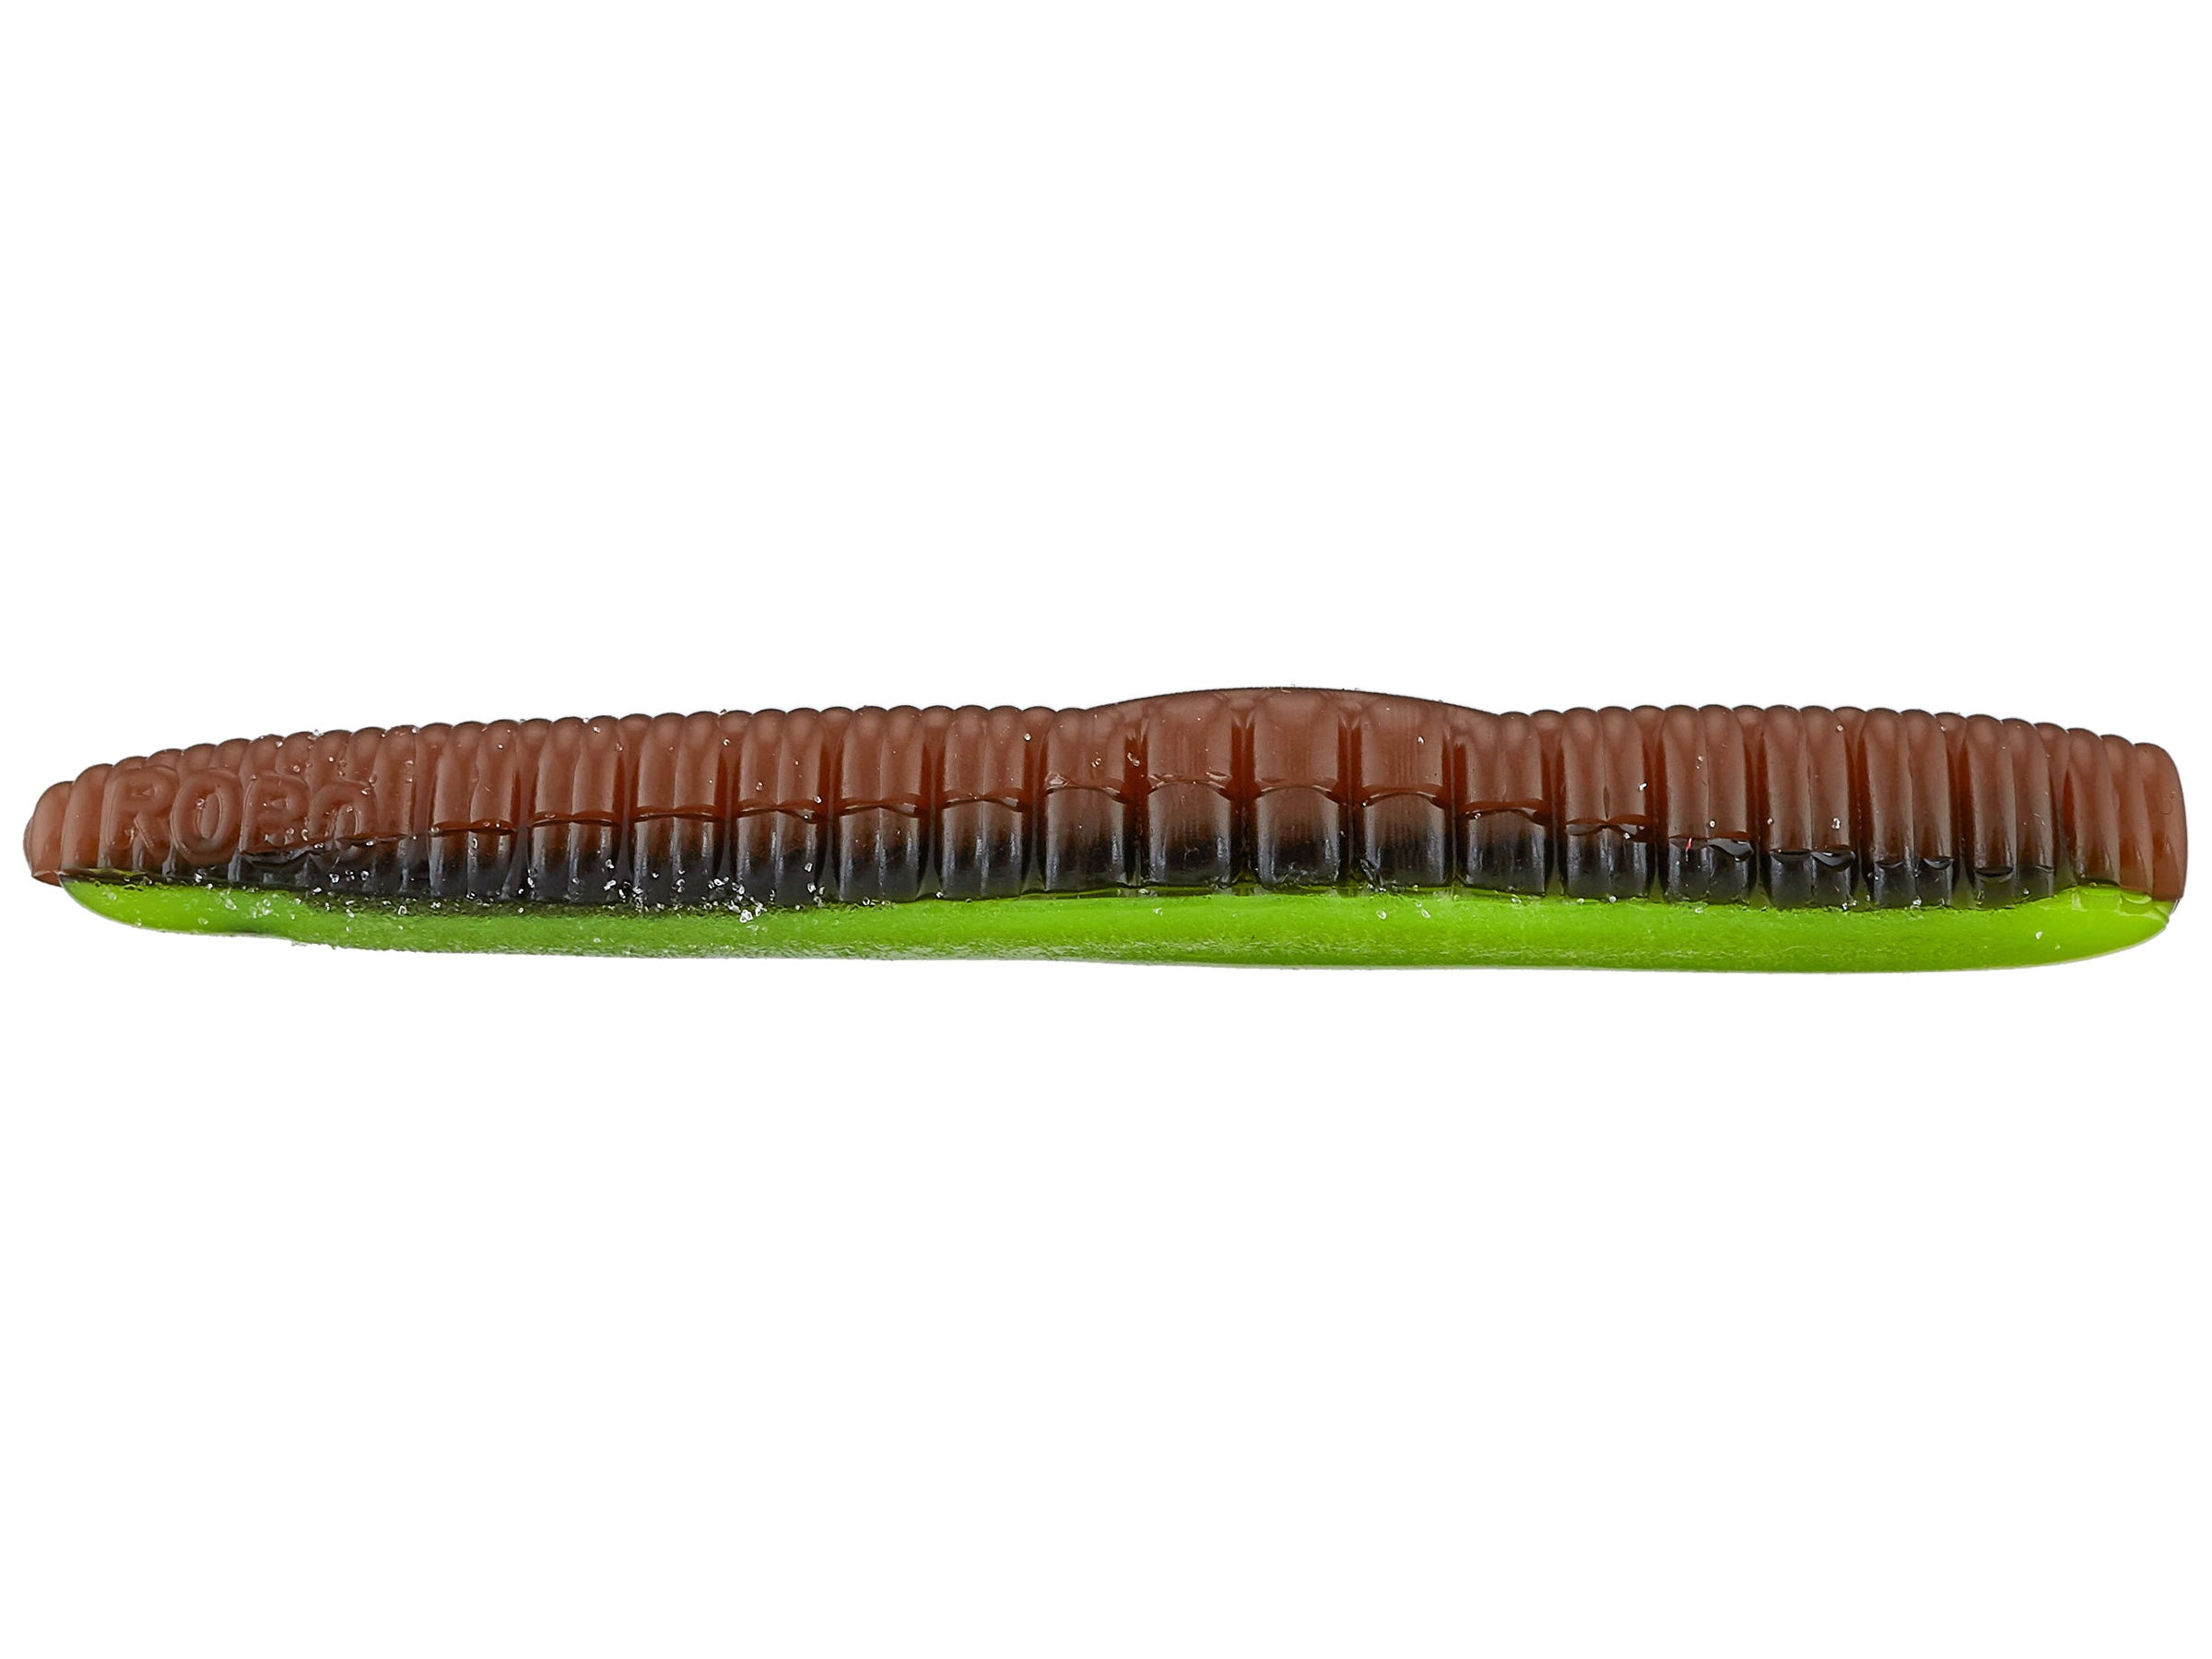 Roboworm N5-8296 Ned 4.5 6pk Aaron's Magic Worm Fish Sinkbait Fishing Lure  for sale online